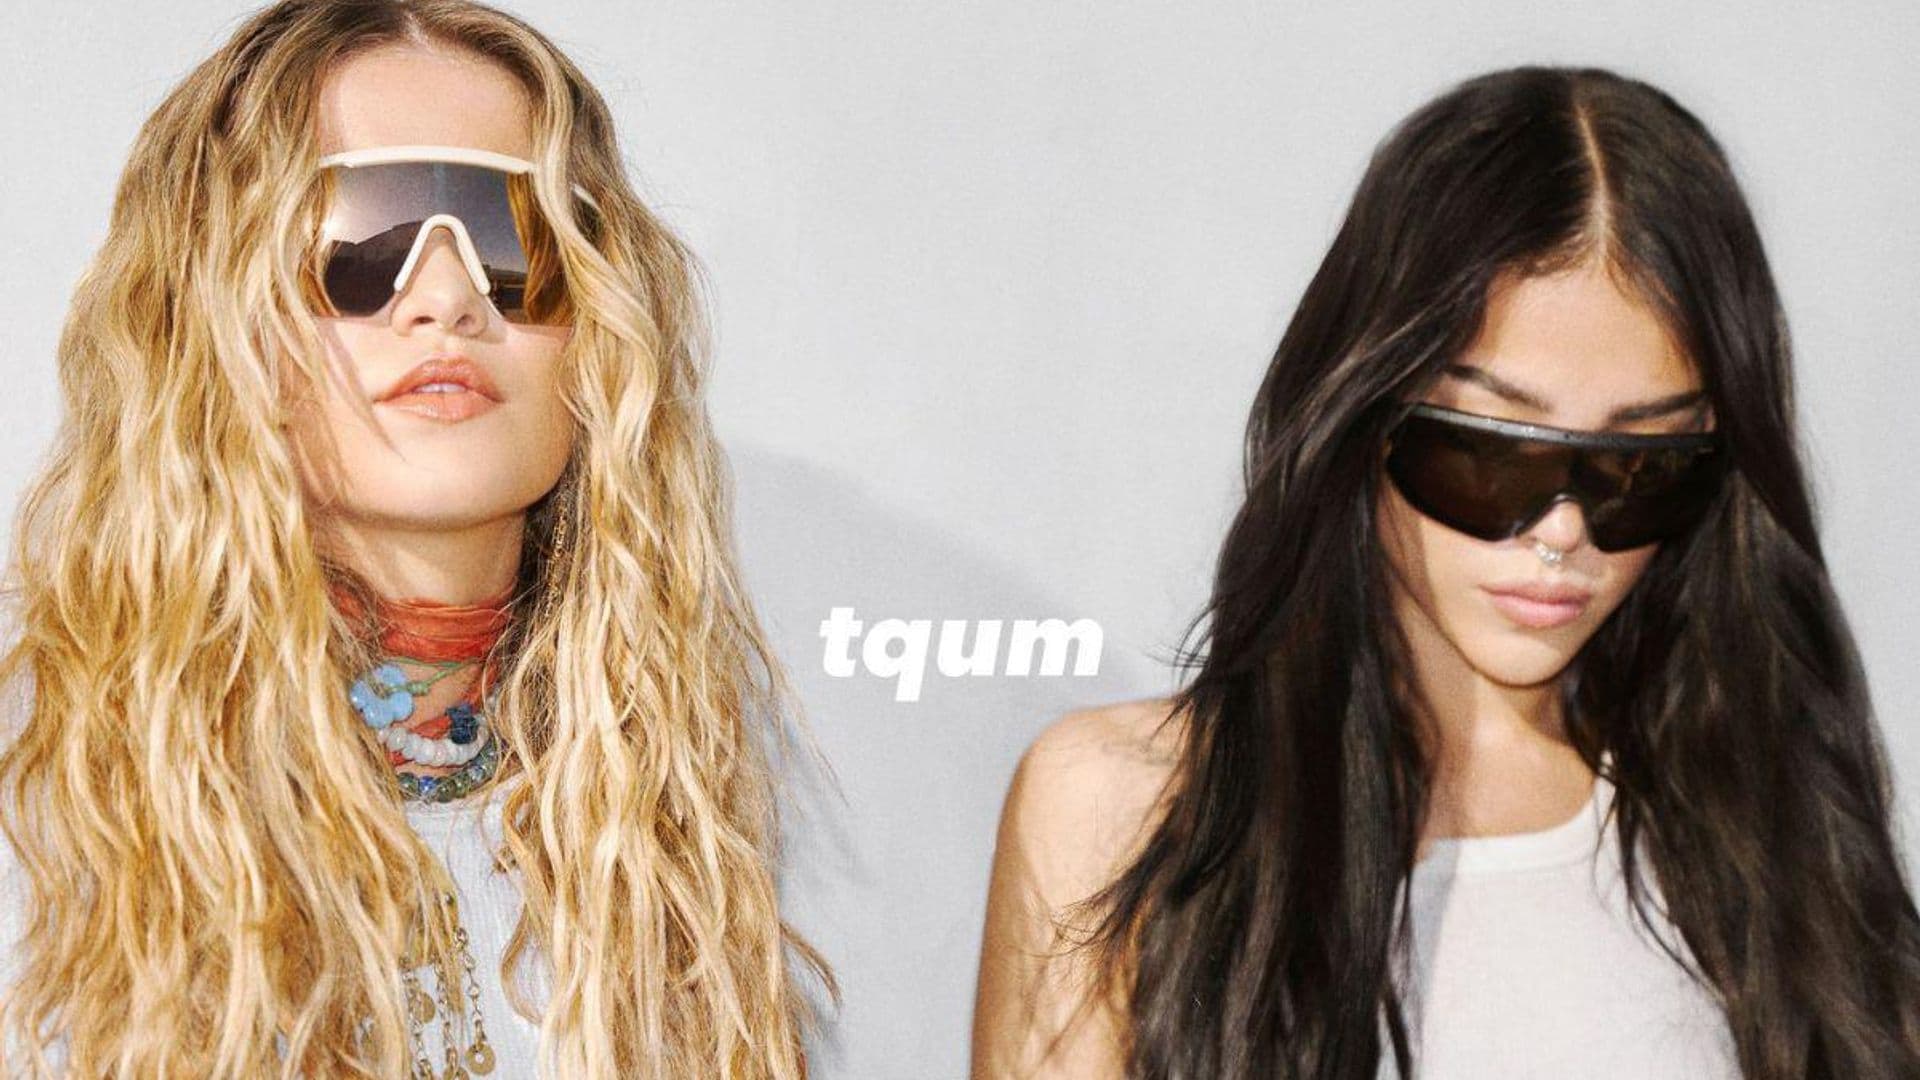 Sofia Reyes and Danna Paola collab on an electrifying hyperpop track, “tqum”